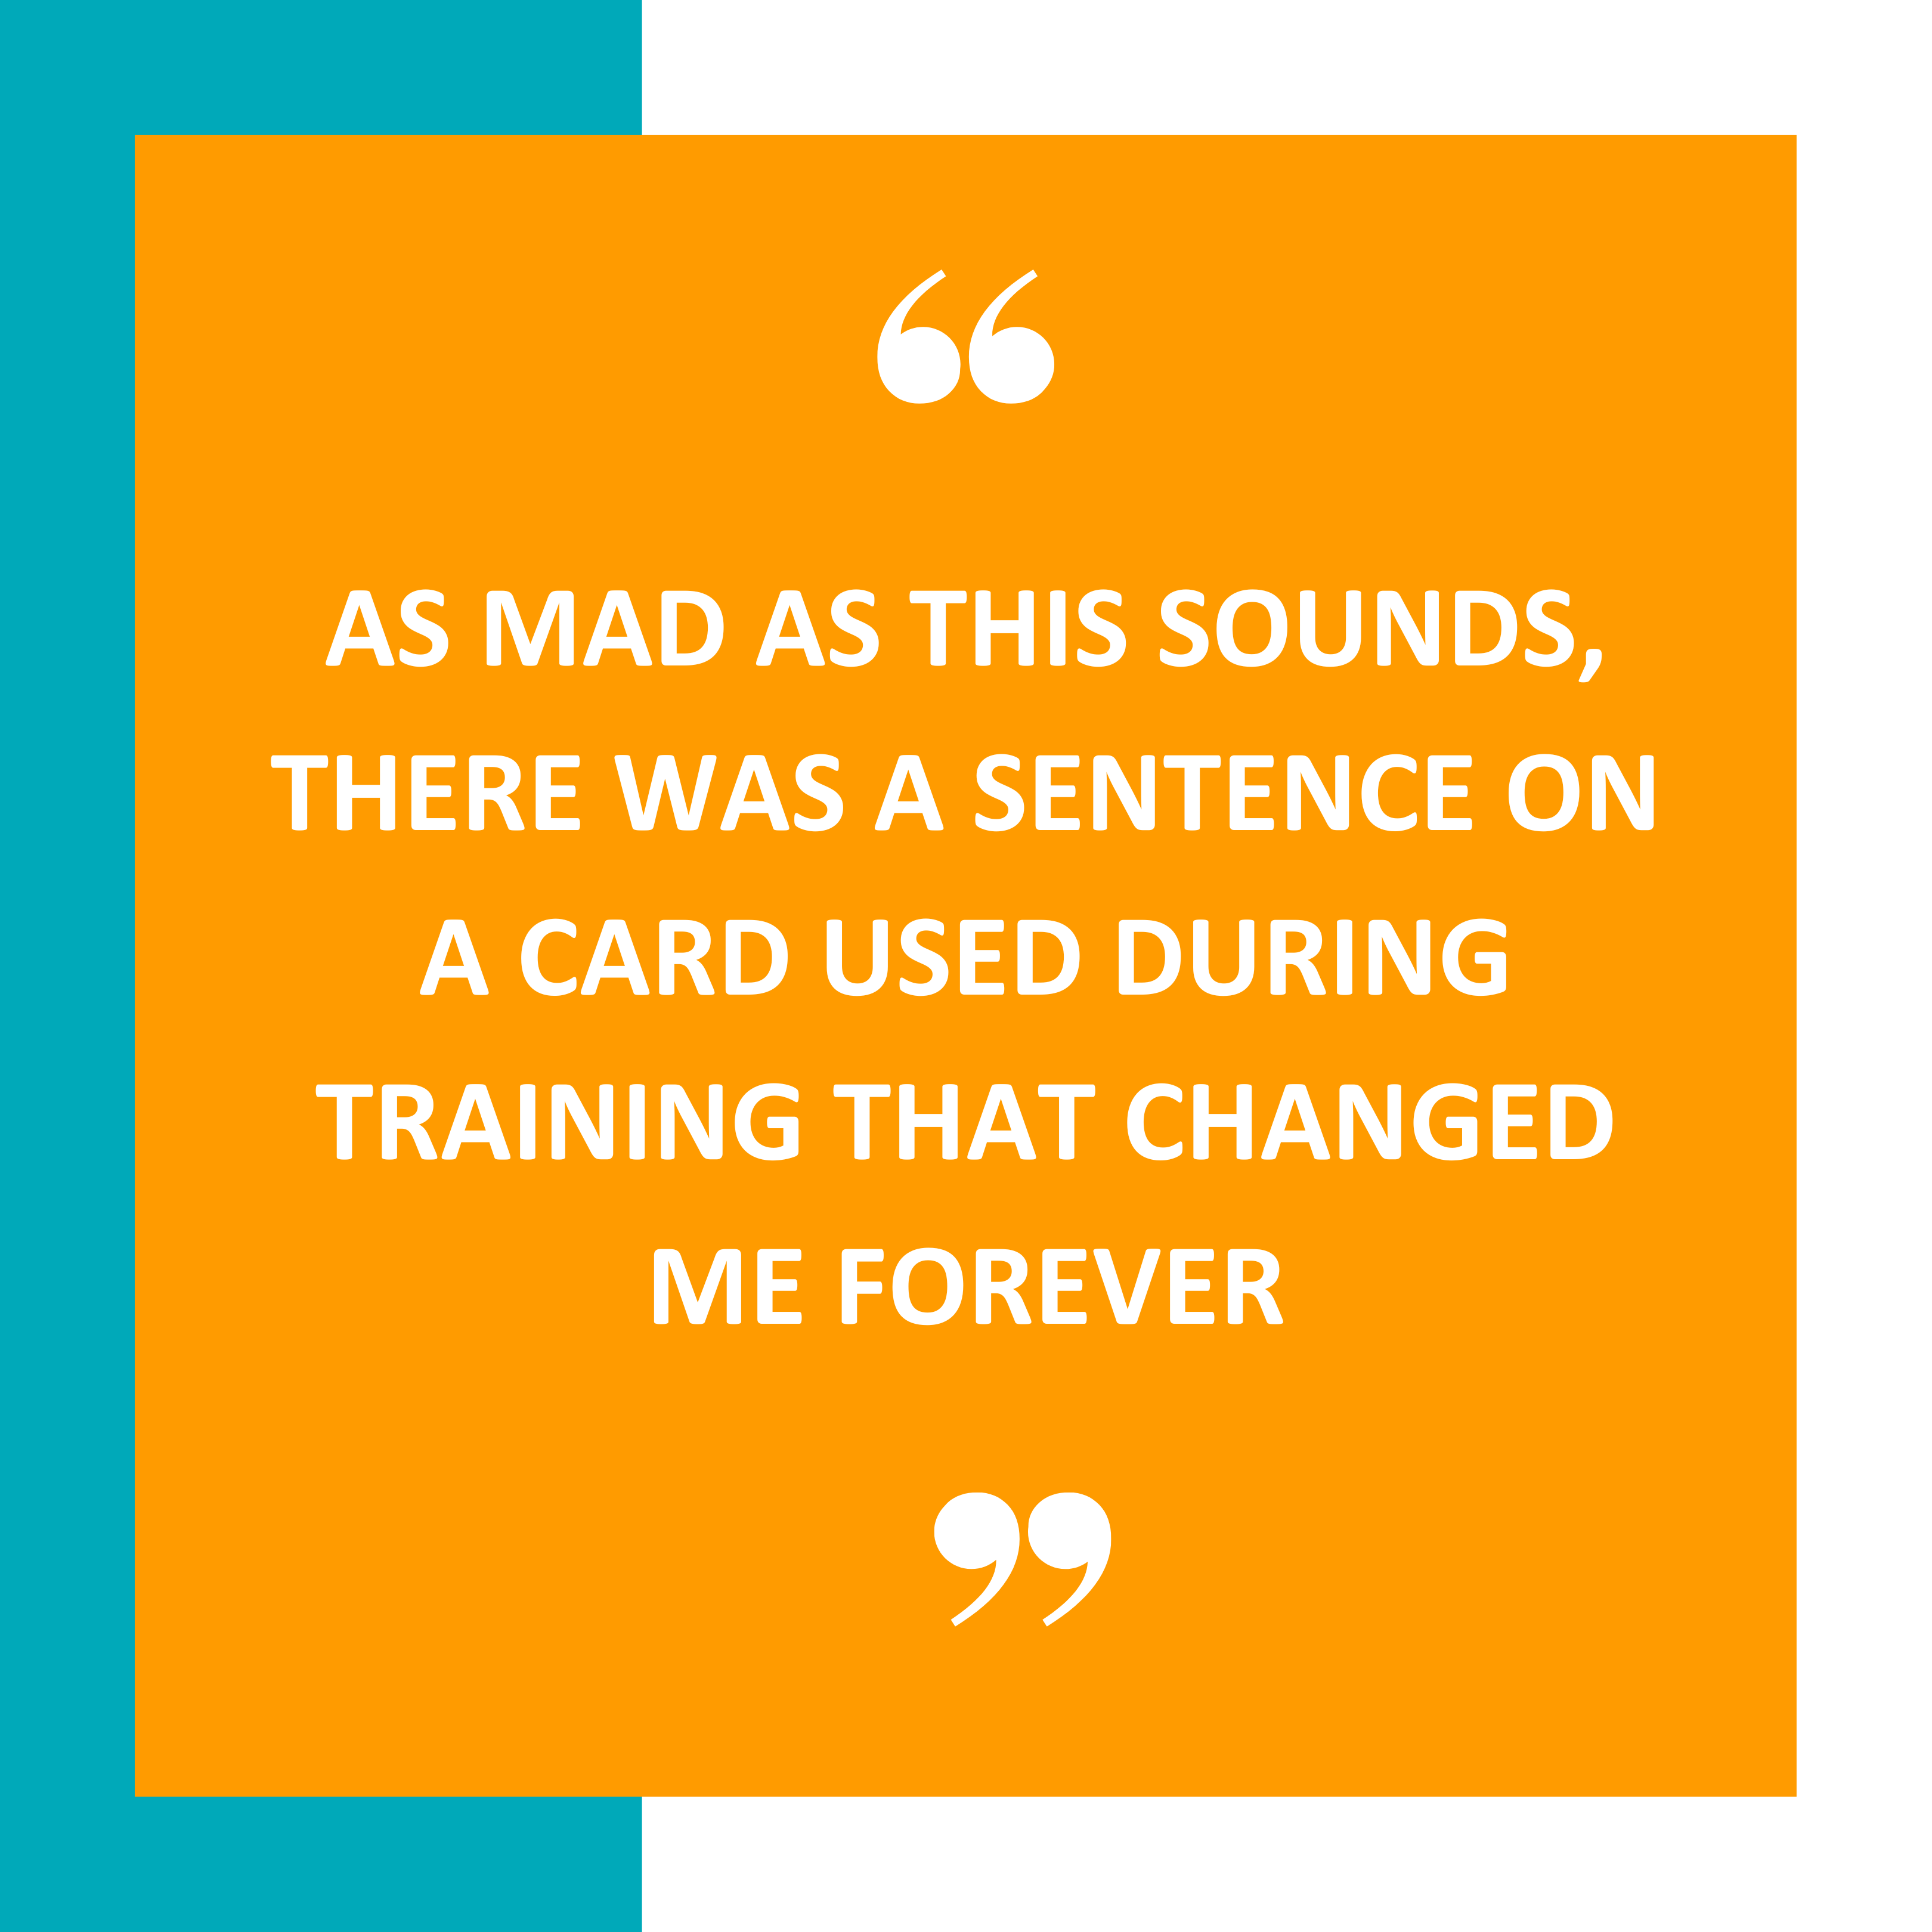 ‘As mad as this sounds, there was a sentence on a card used during training that changed me forever’.